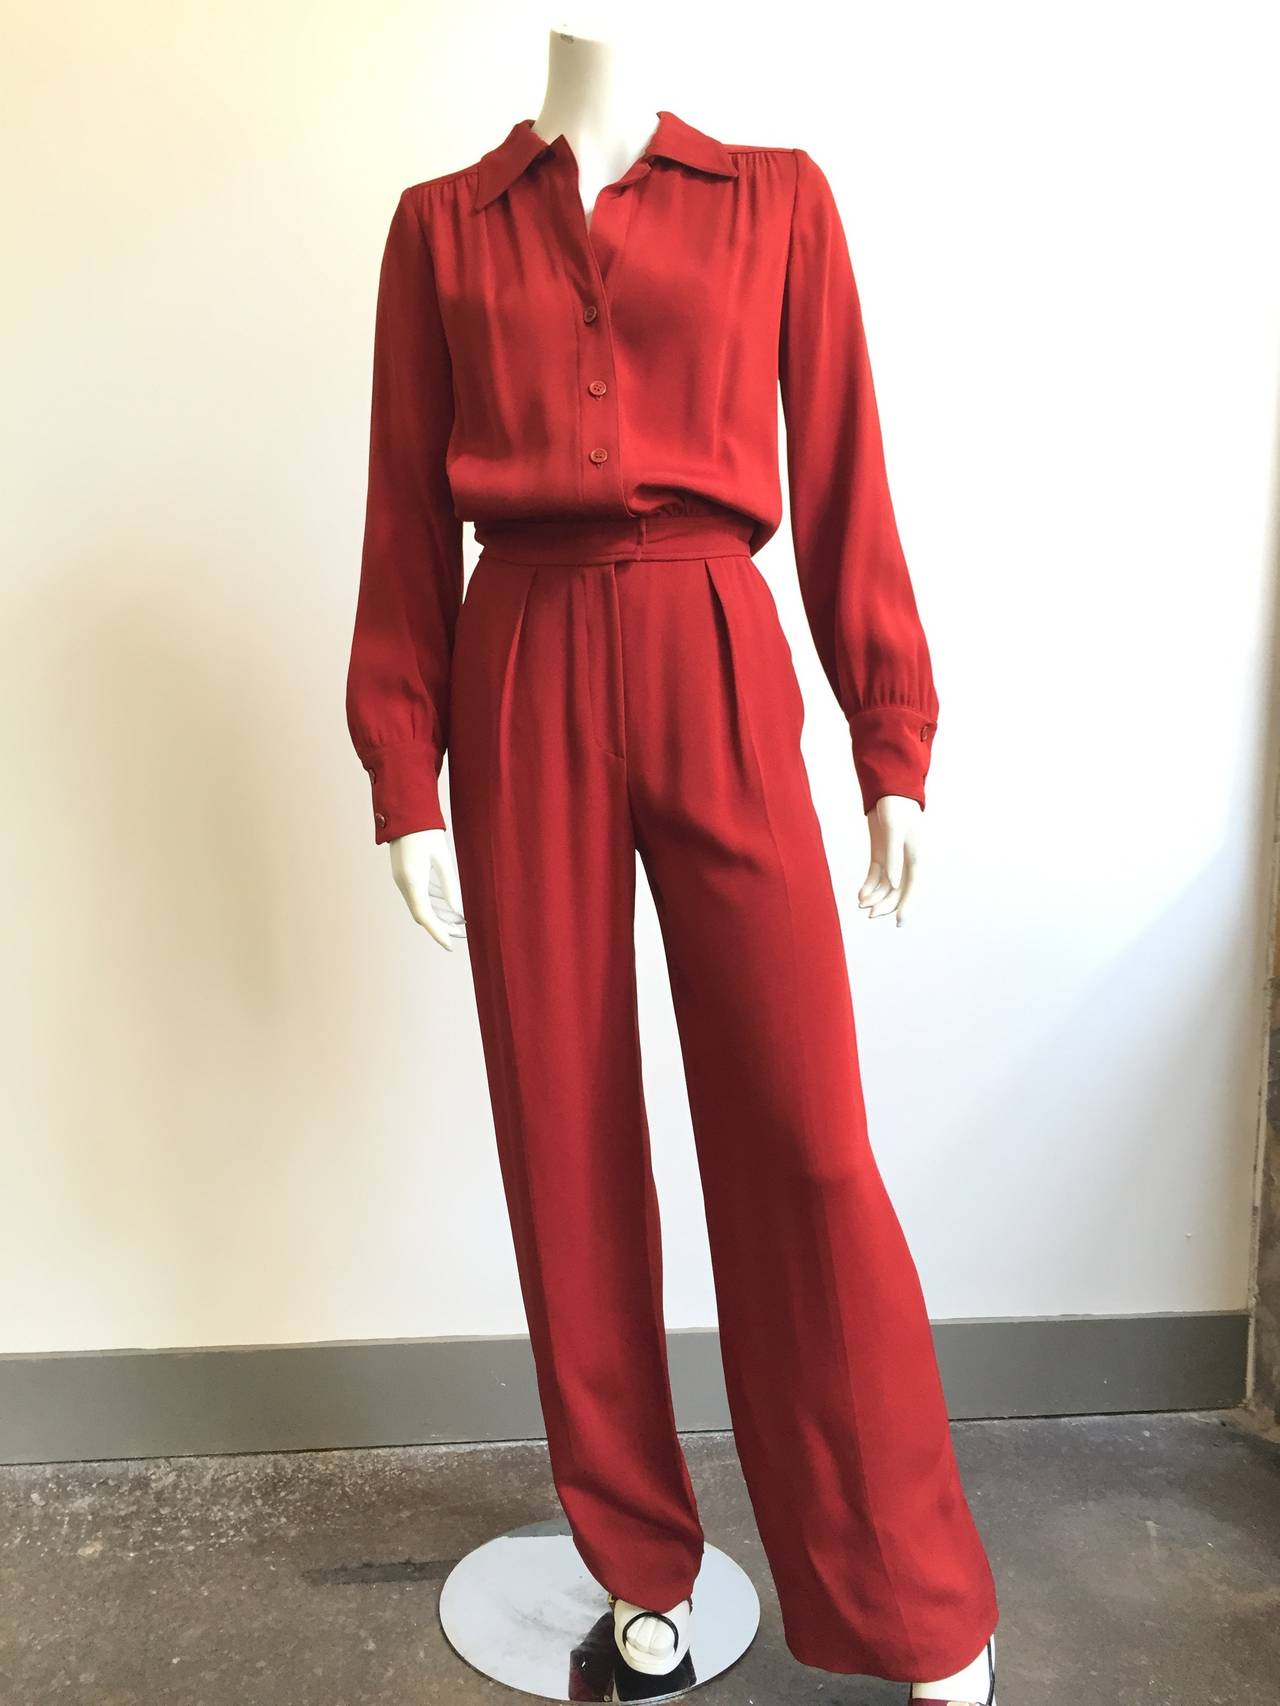 Anne Klein for I.Magnin 80s jumpsuit with pockets size 4. 4